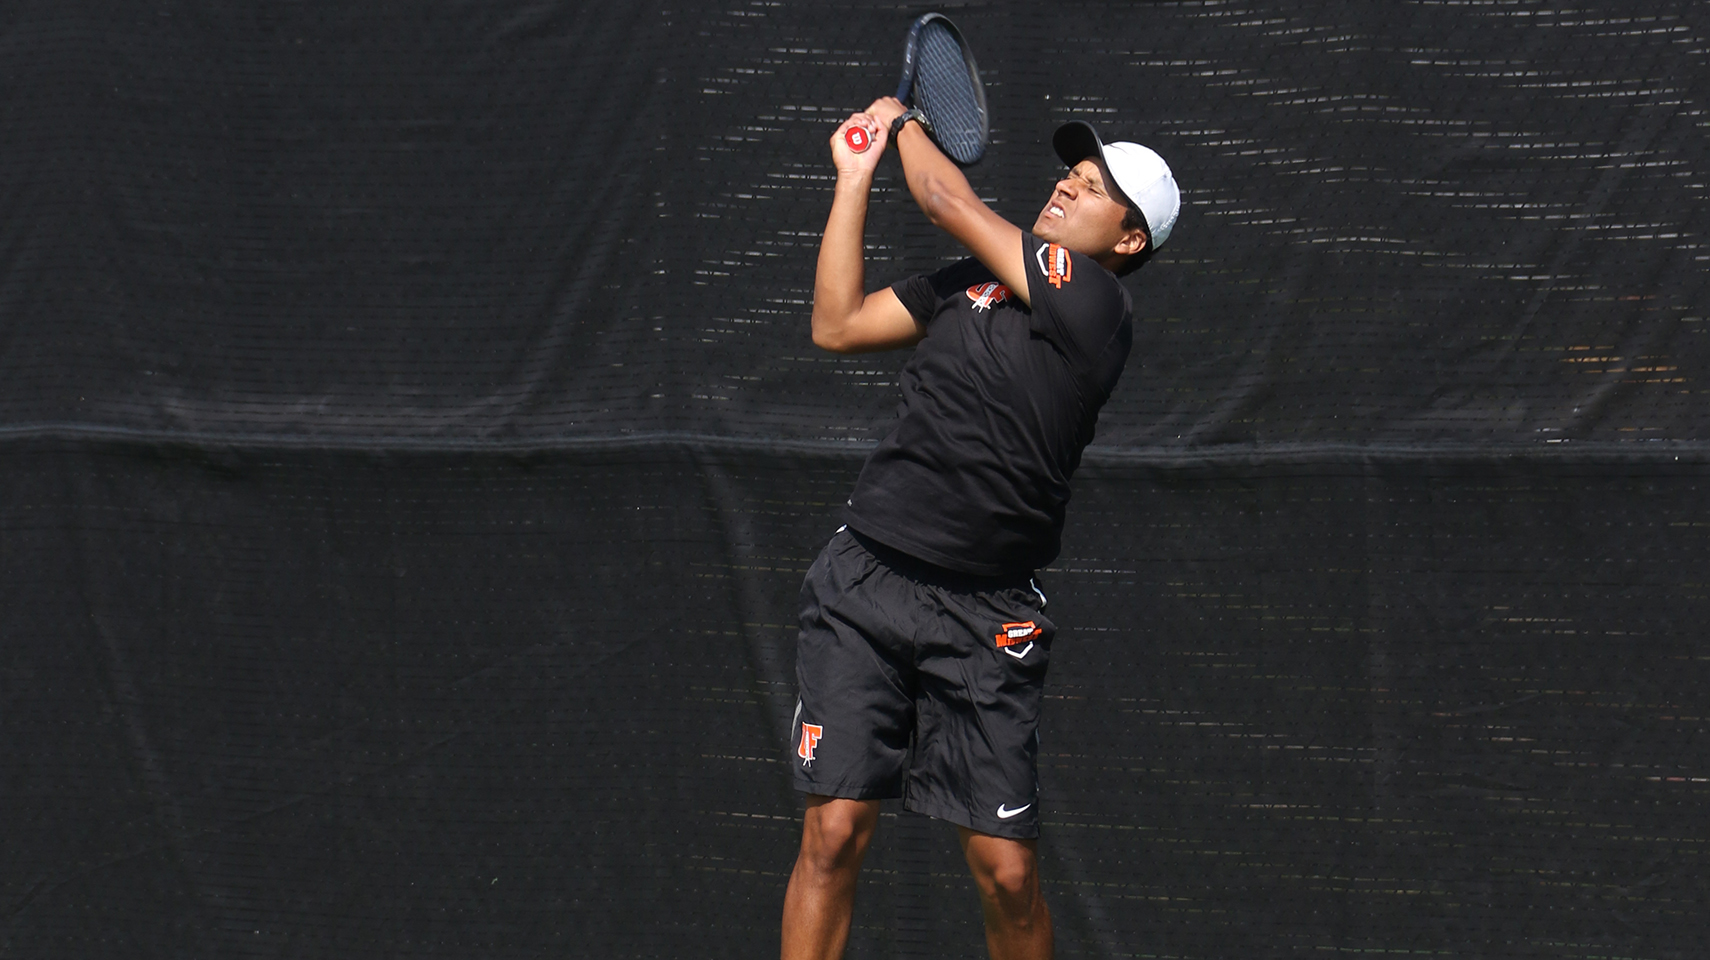 Men's tennis player jumping to hit the ball